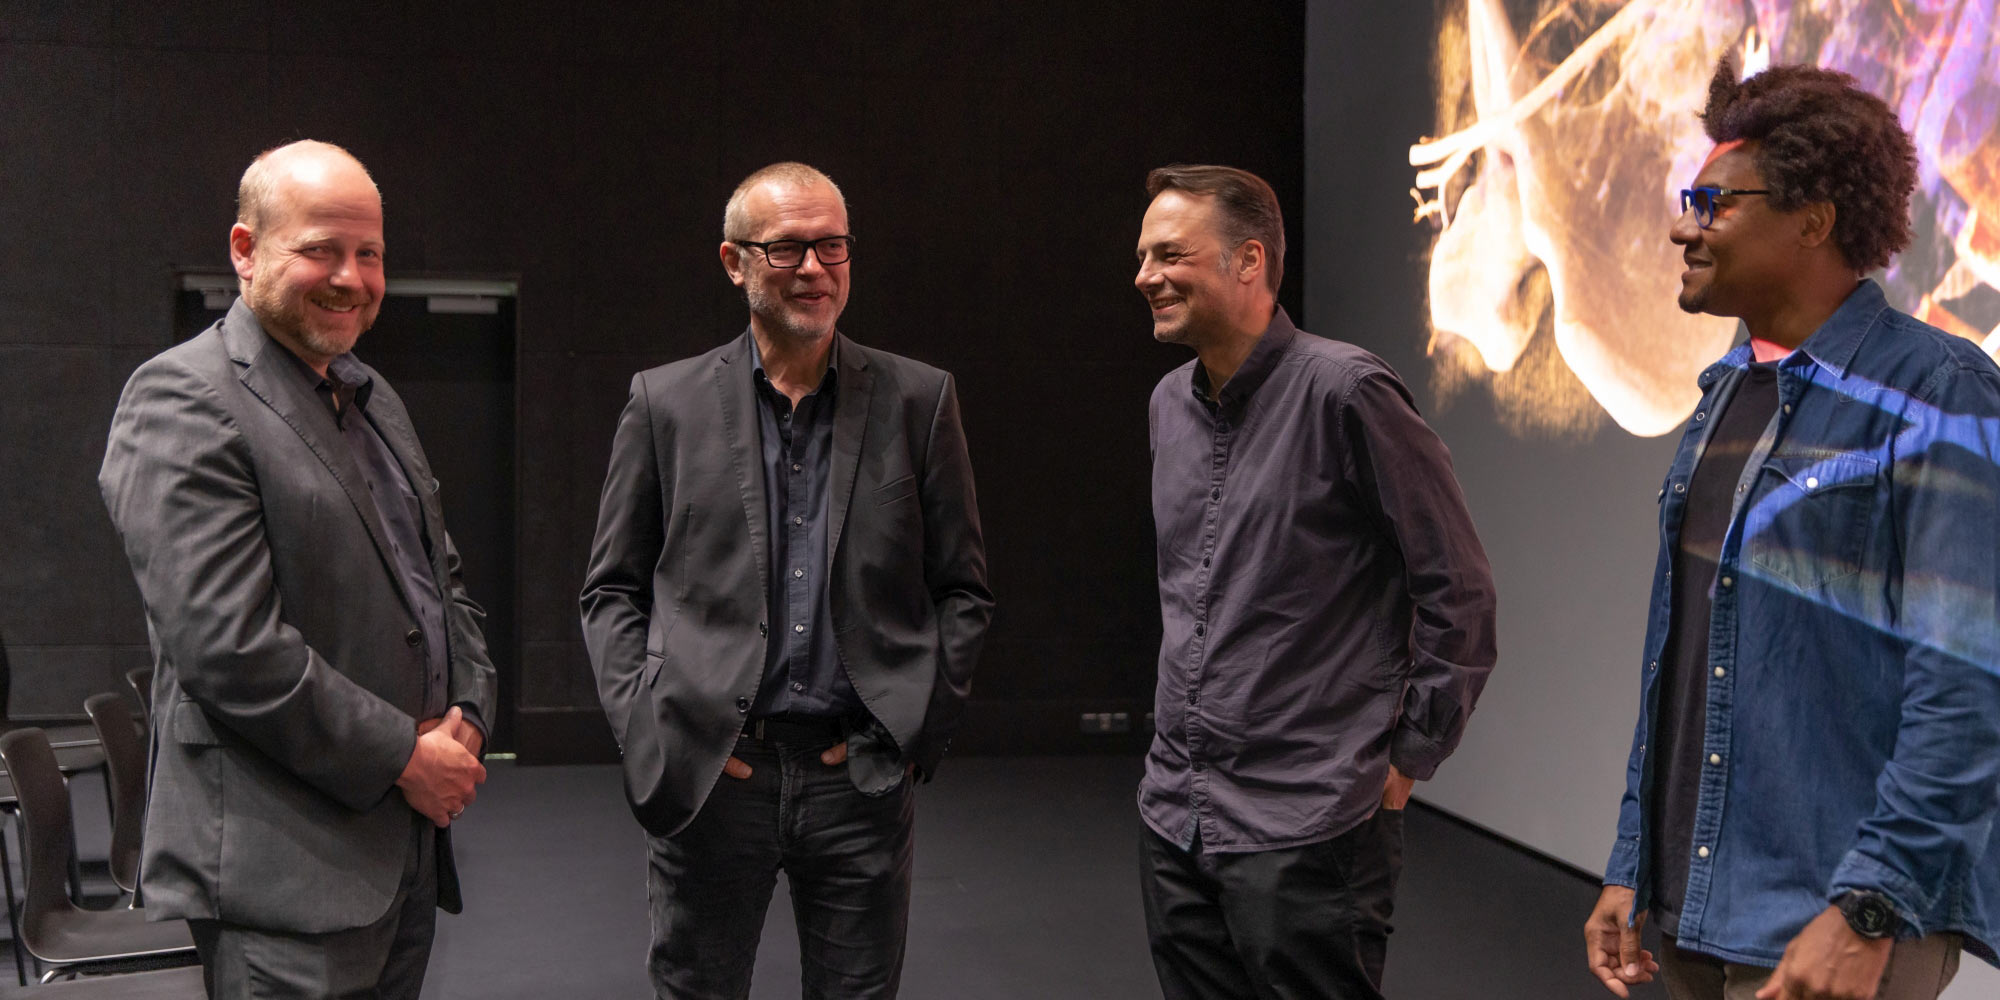 Happy developers of "Cinematic Anatomy x Deep Space": Klaus Engel of Siemens Healthineers with CTO Horst Hörtner, Technical Director Roland Haring and Friedrich Bachinger from the Ars Electronica Futurelab